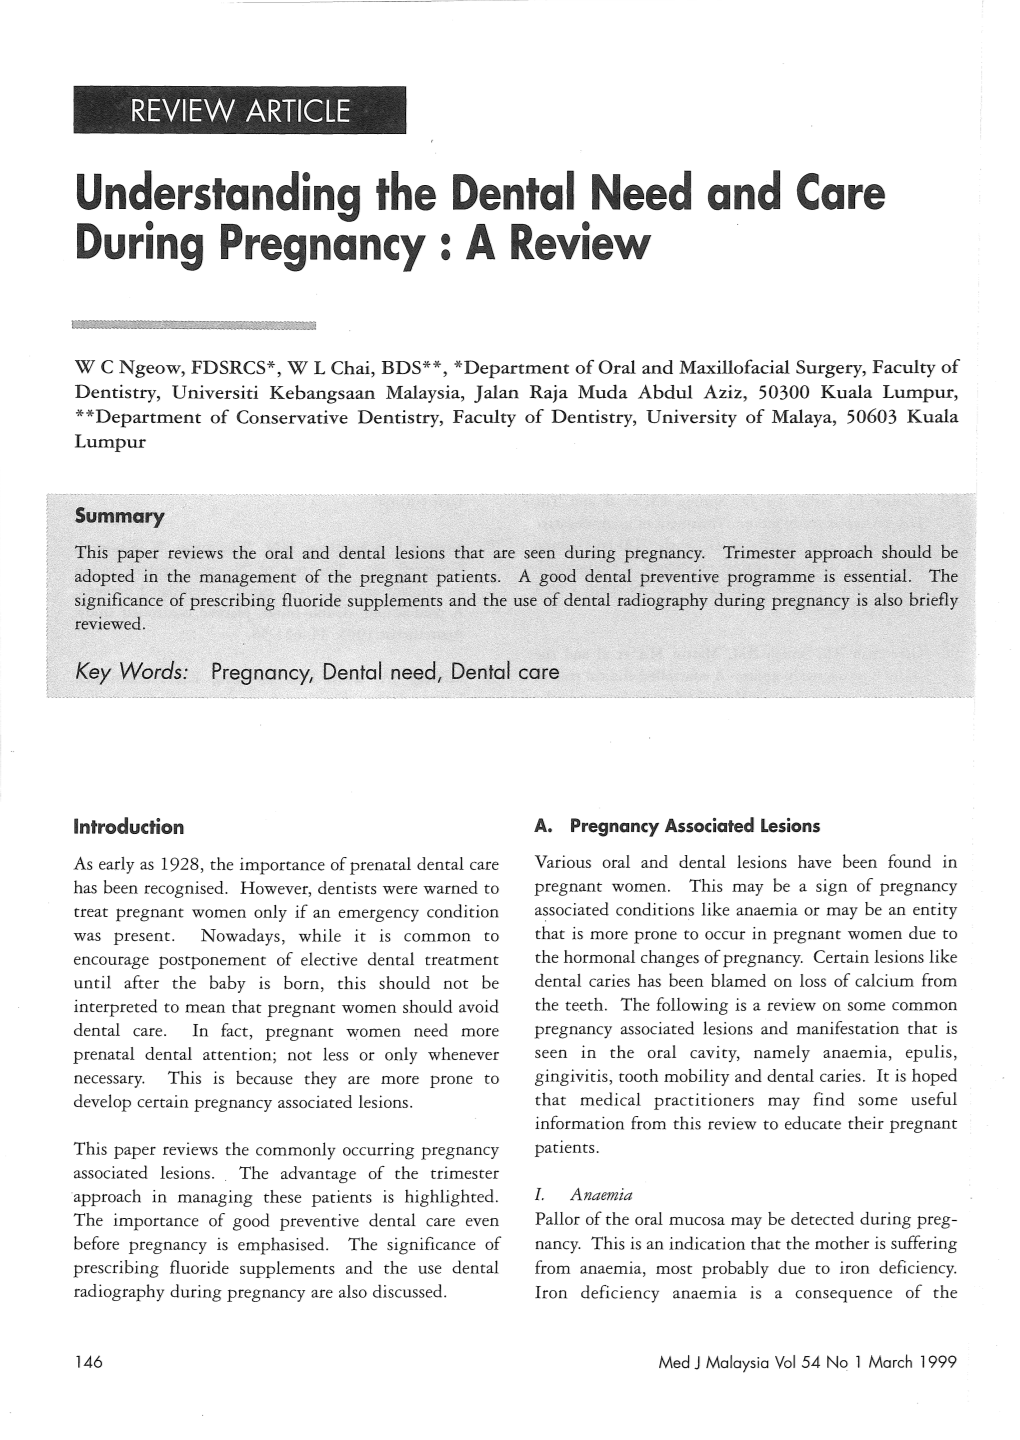 Understanding the Dental Need and Care During Pregnancy: a Review